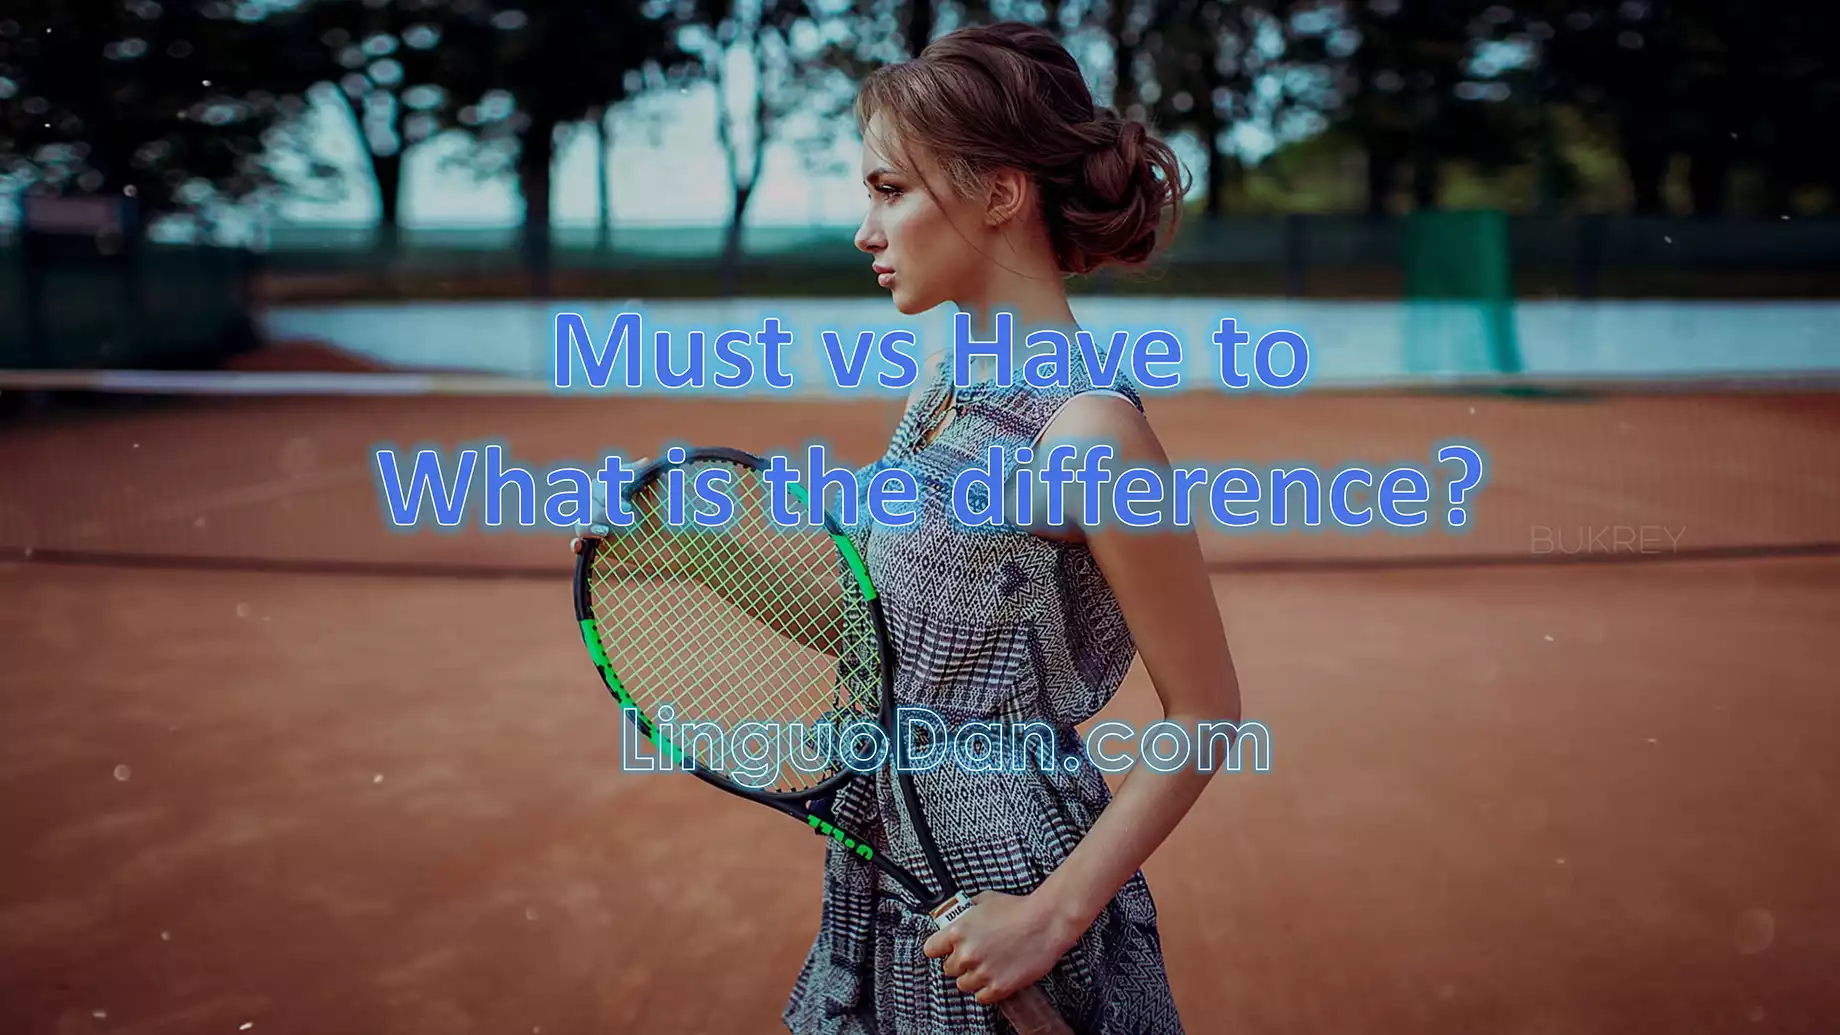 Must vs. Have to - What is the difference? - English Grammar